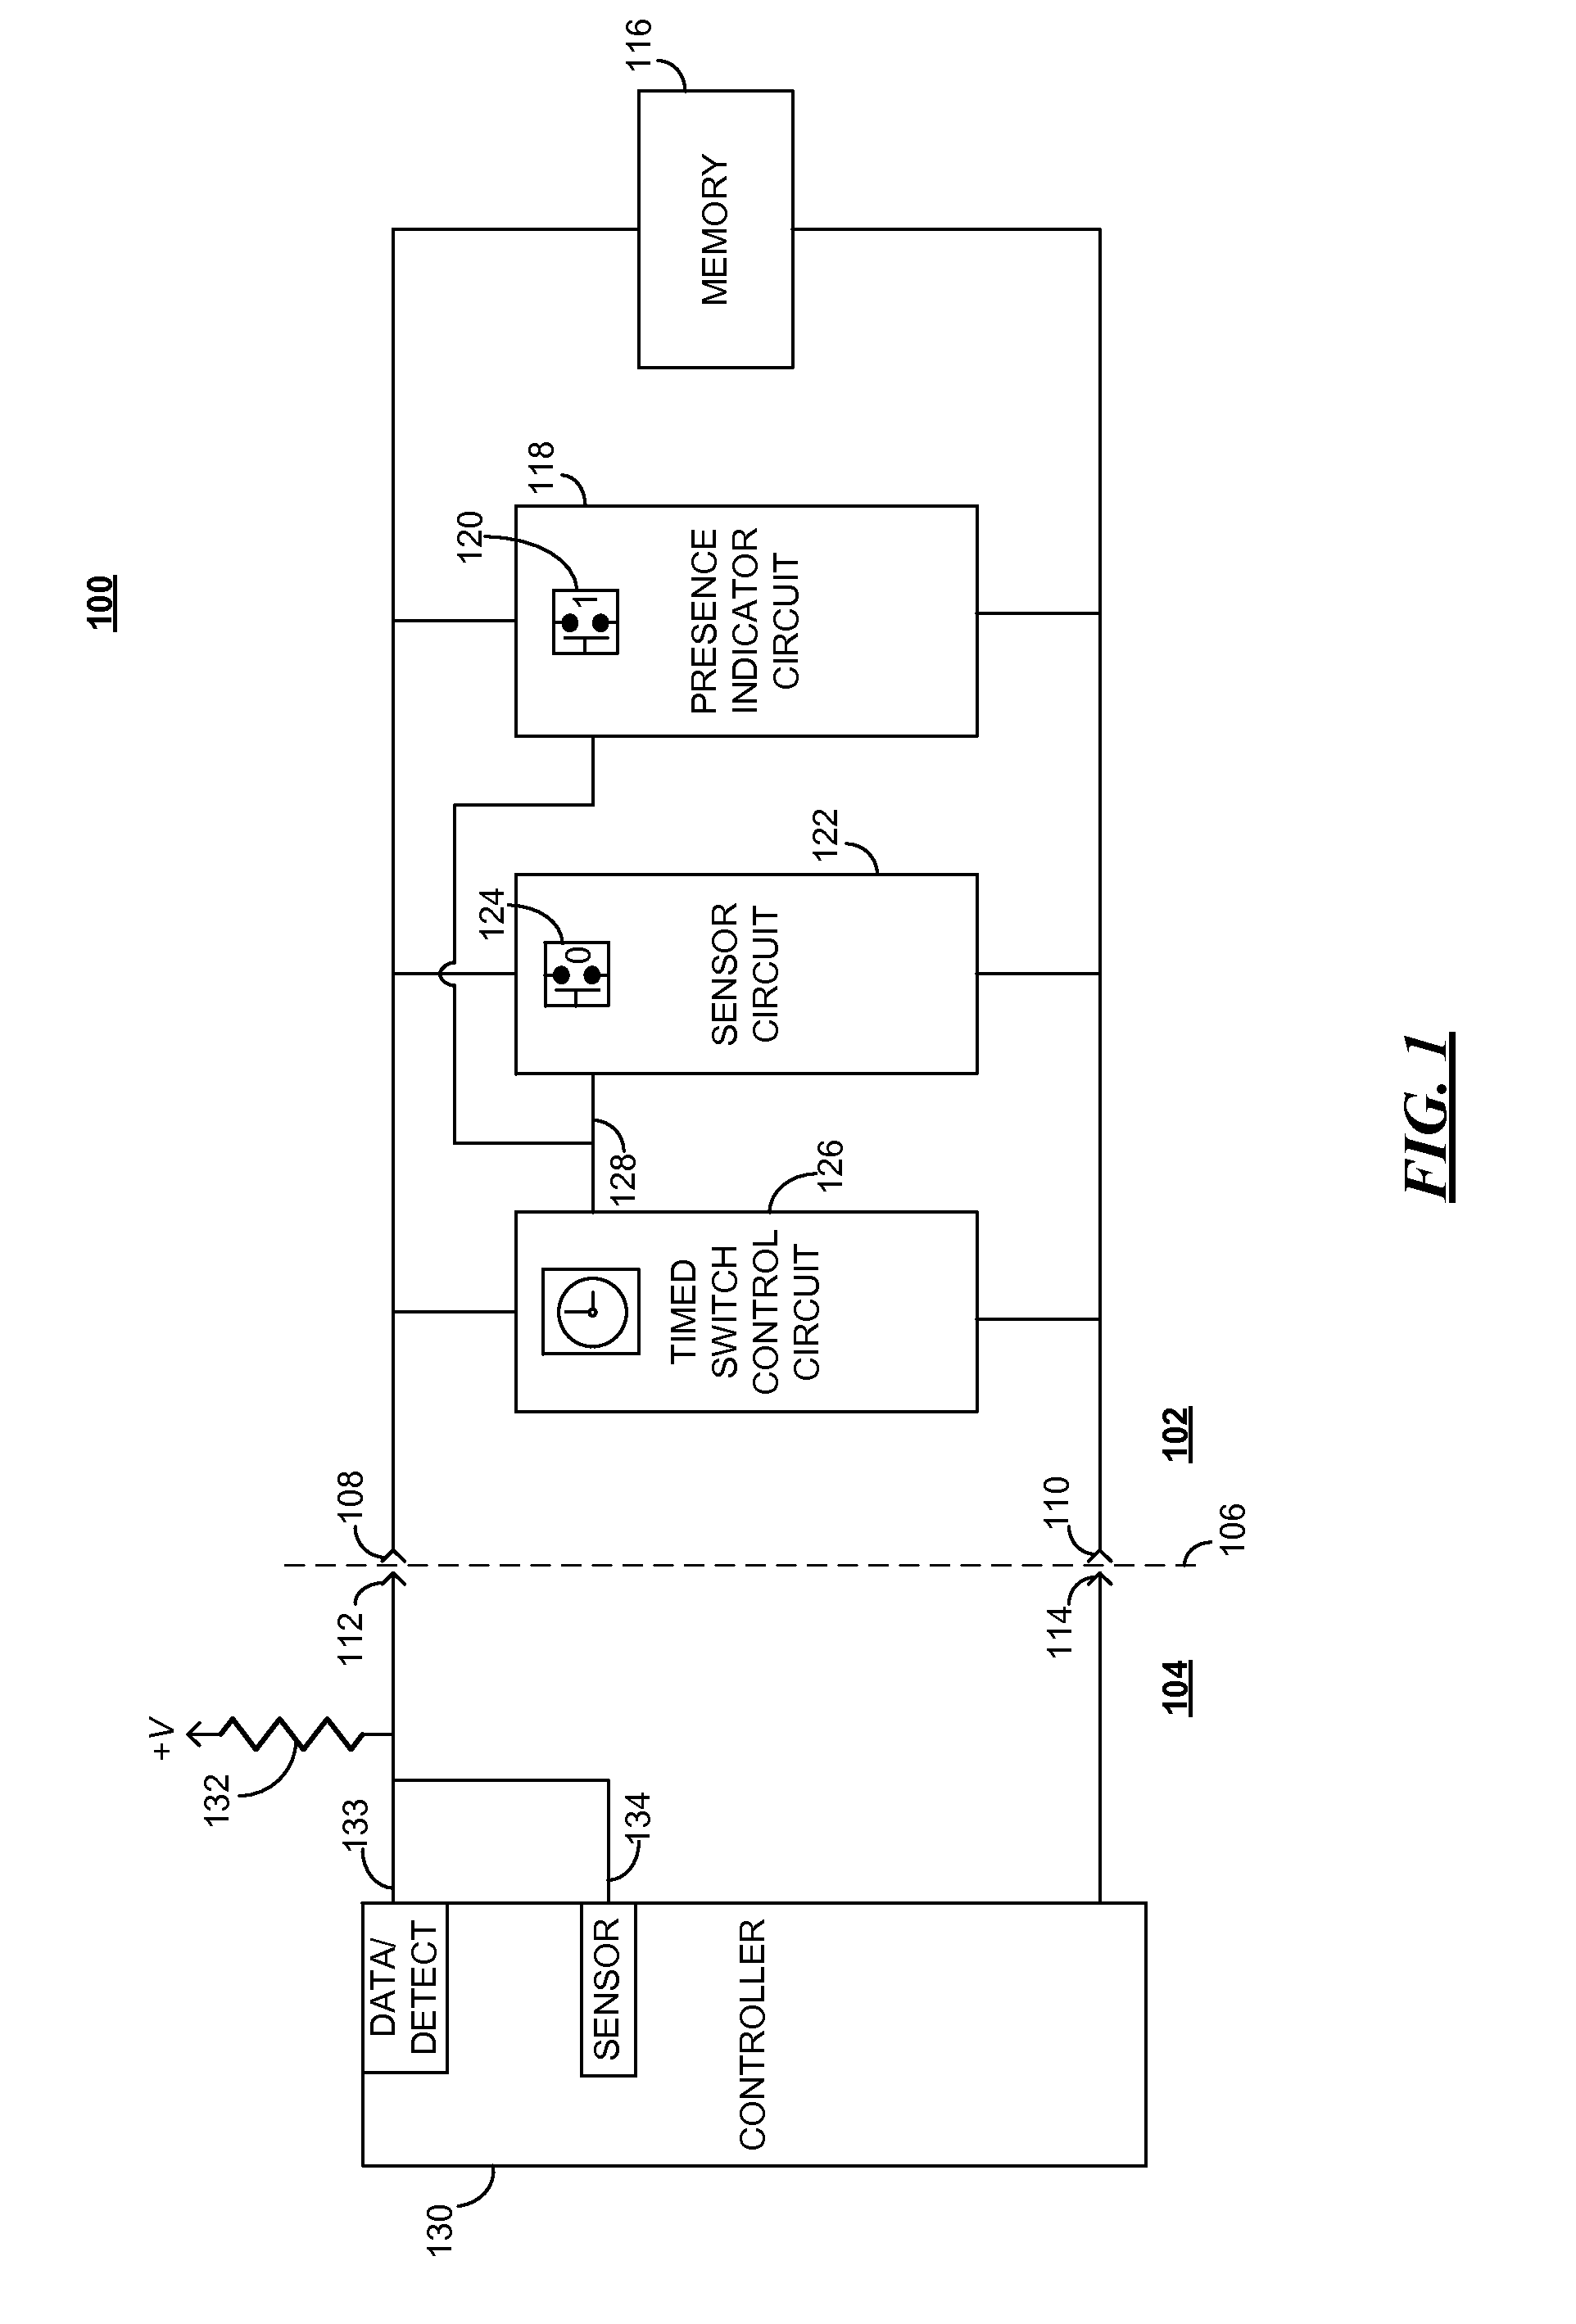 Method and apparatus for a multiplexed contact between electrical devices